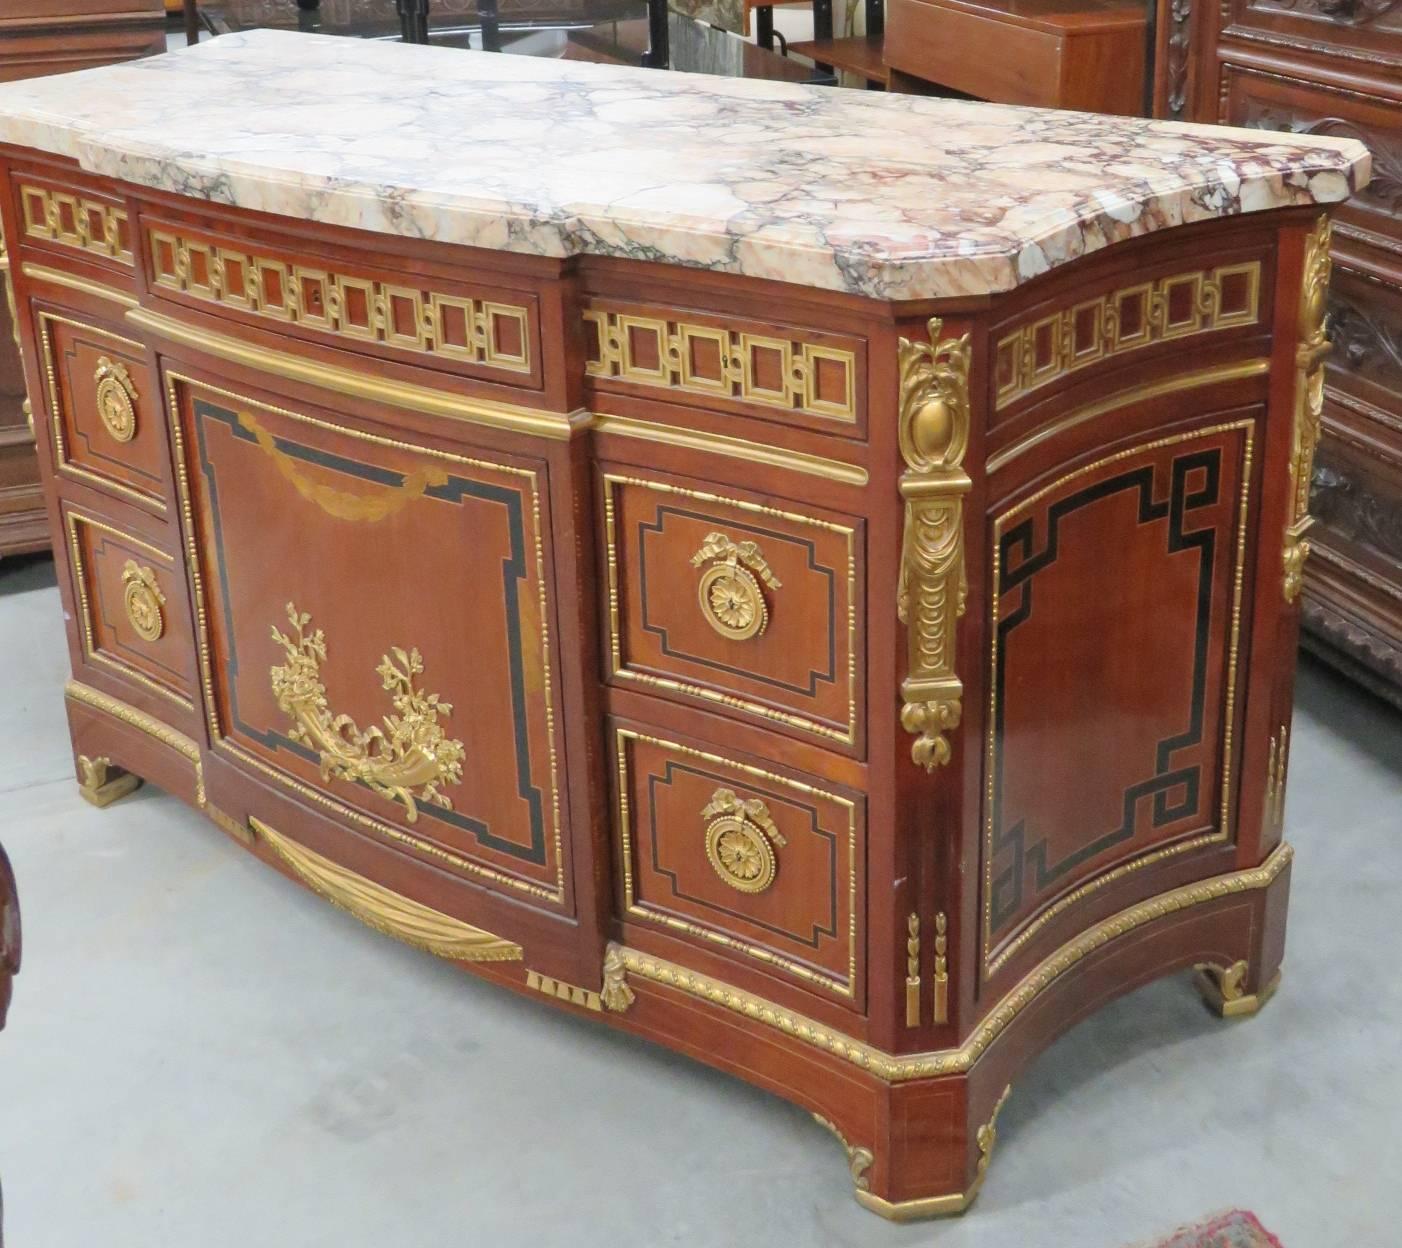 20th Century Inlaid Marble-Top Commode